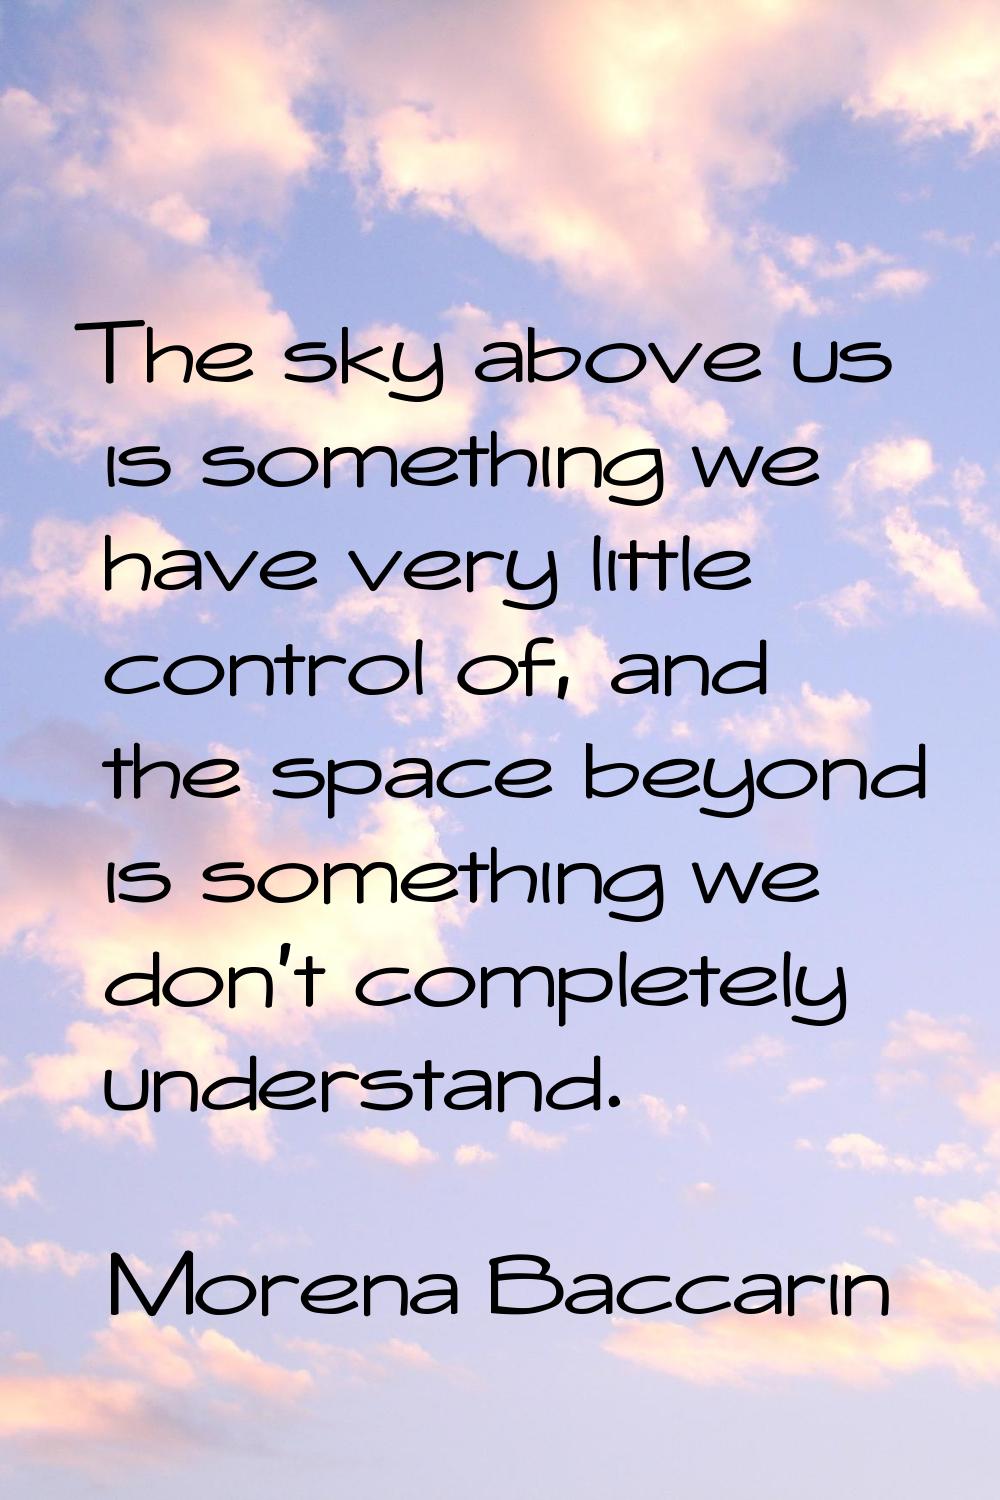 The sky above us is something we have very little control of, and the space beyond is something we 